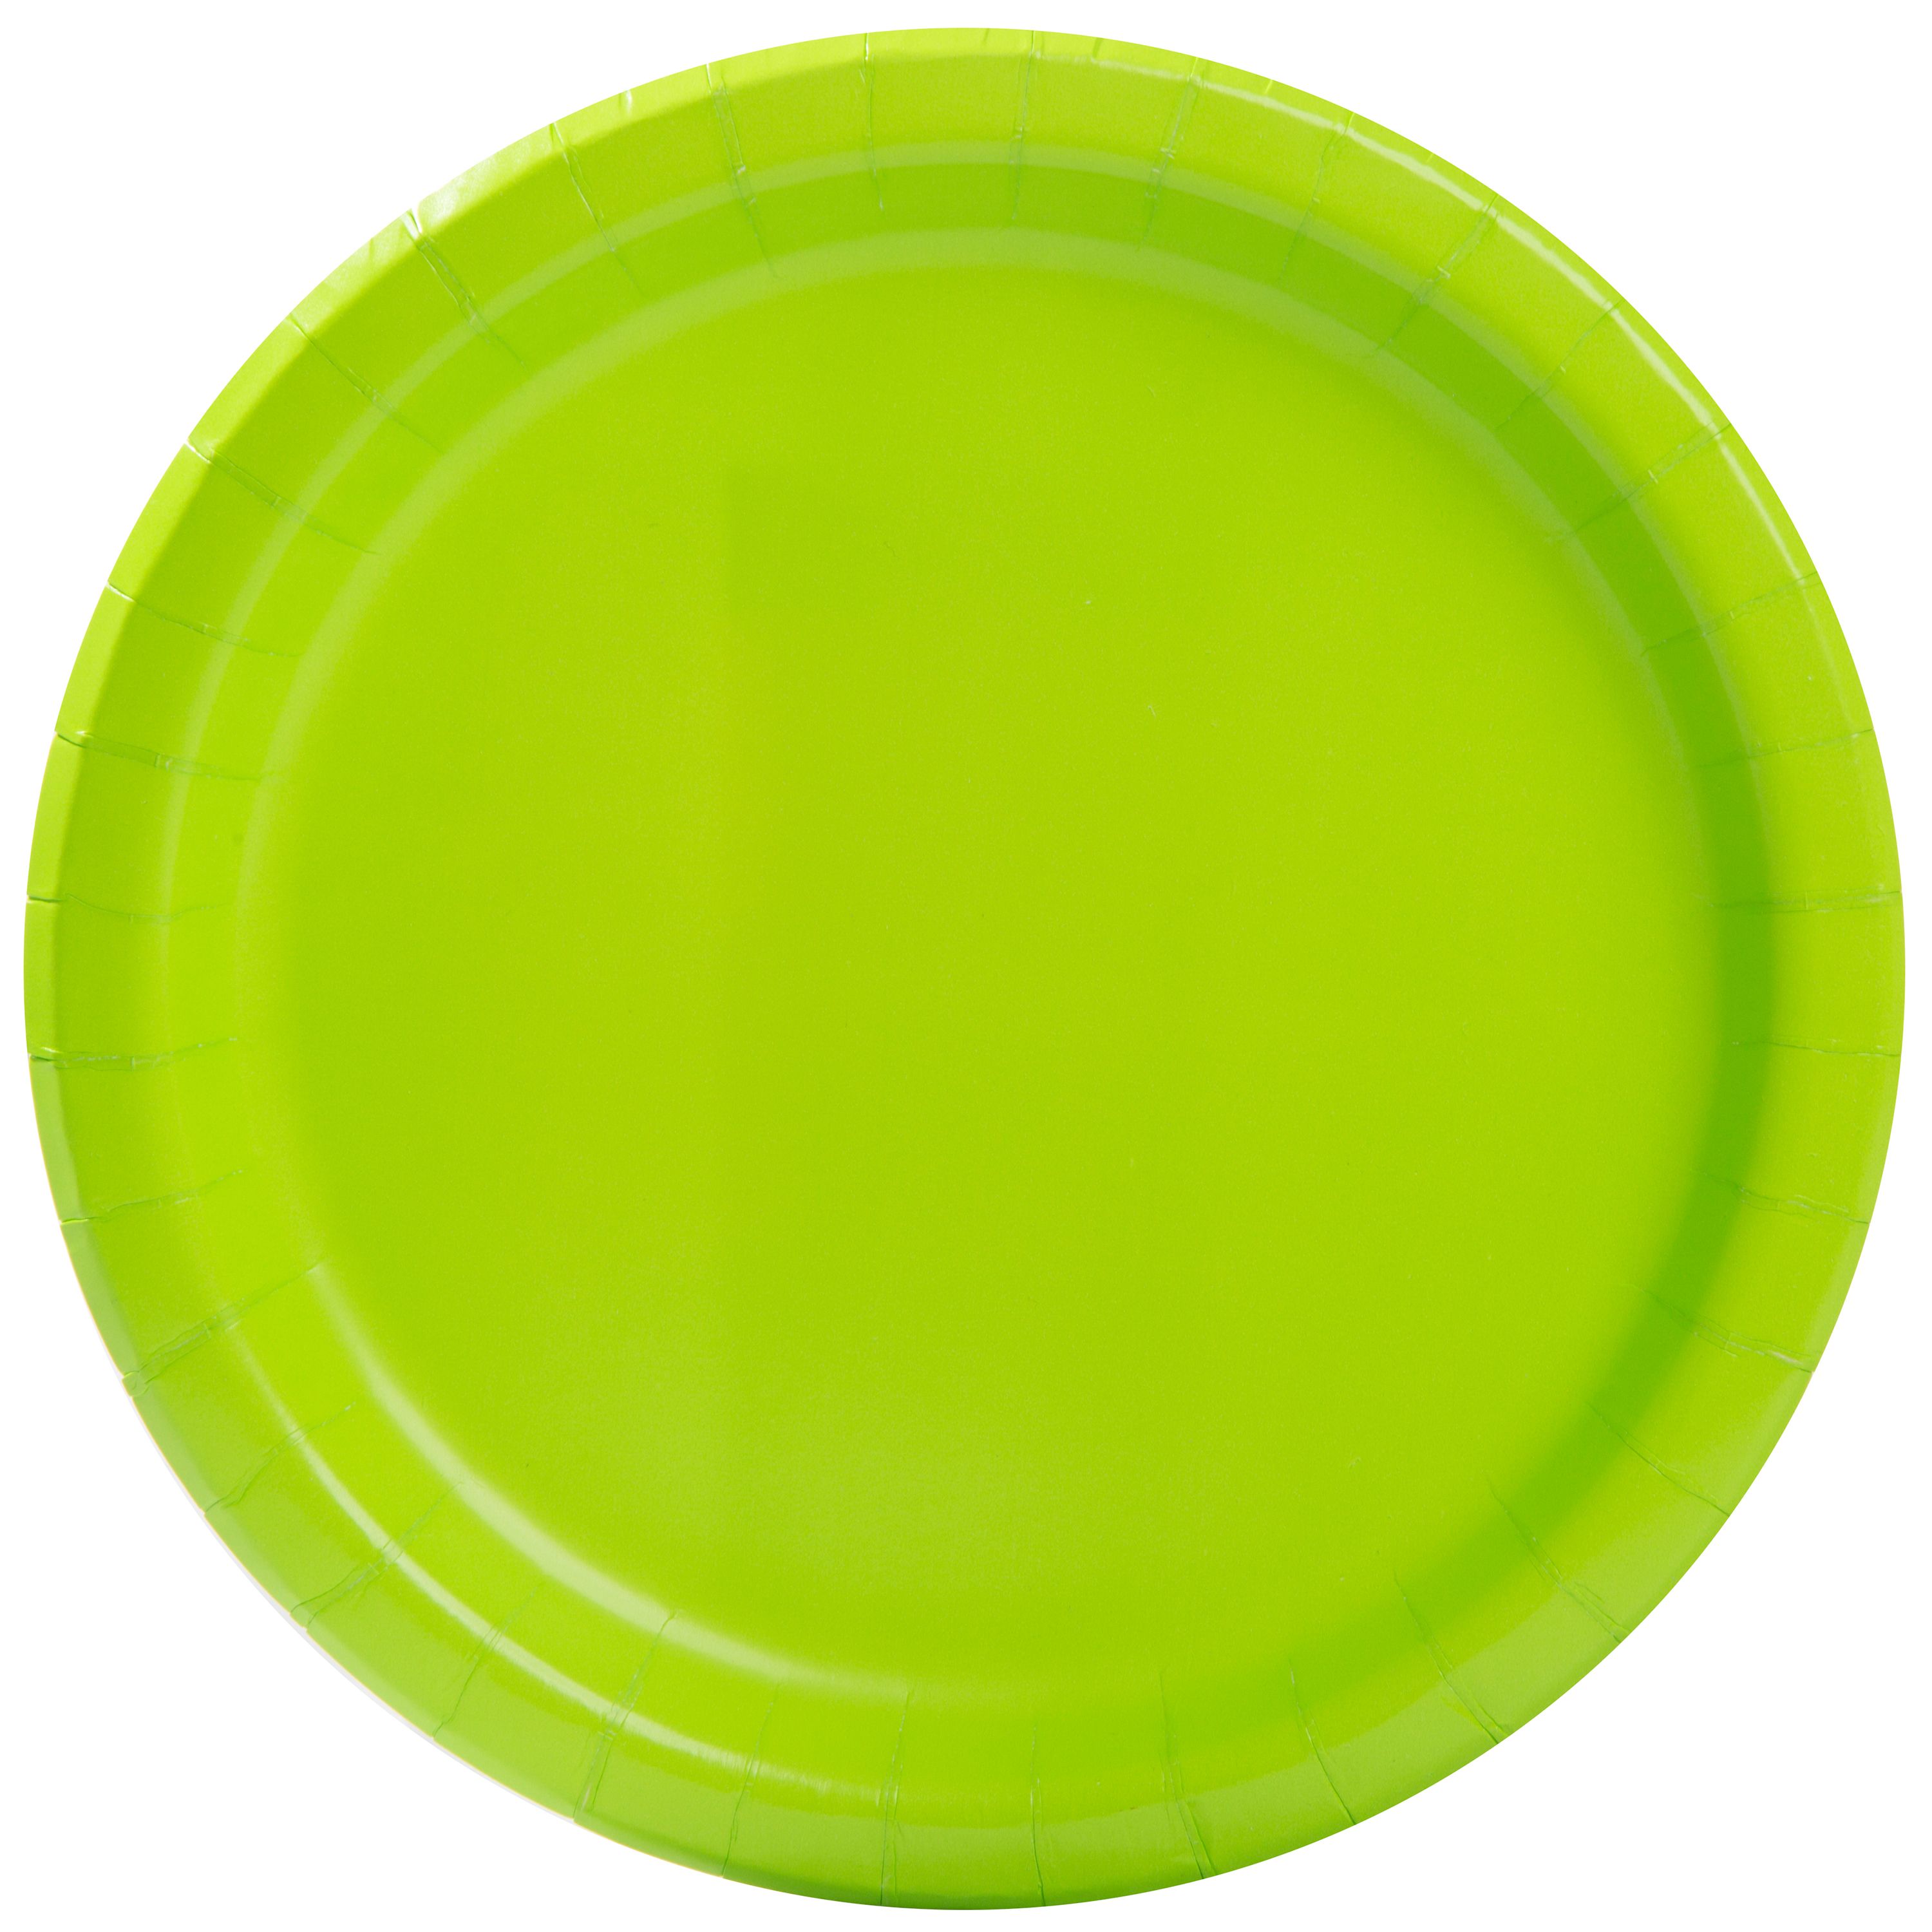 9" Neon Green Party Plates, 55 Count - image 1 of 2